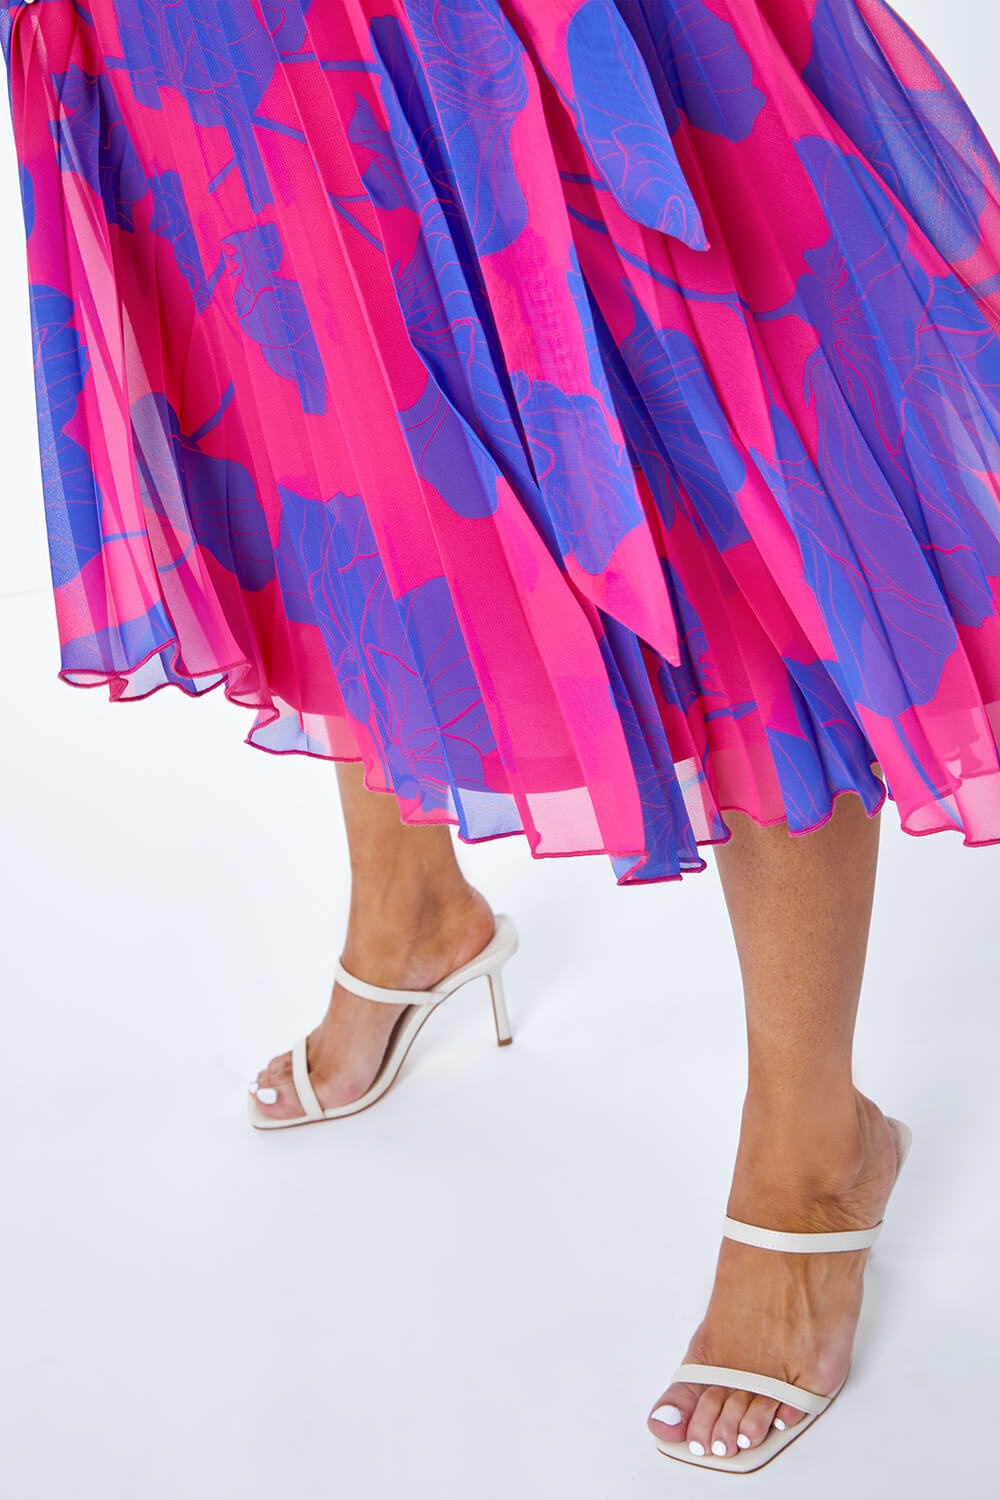 PINK Petite Linear Floral Print Pleated Dress, Image 5 of 5